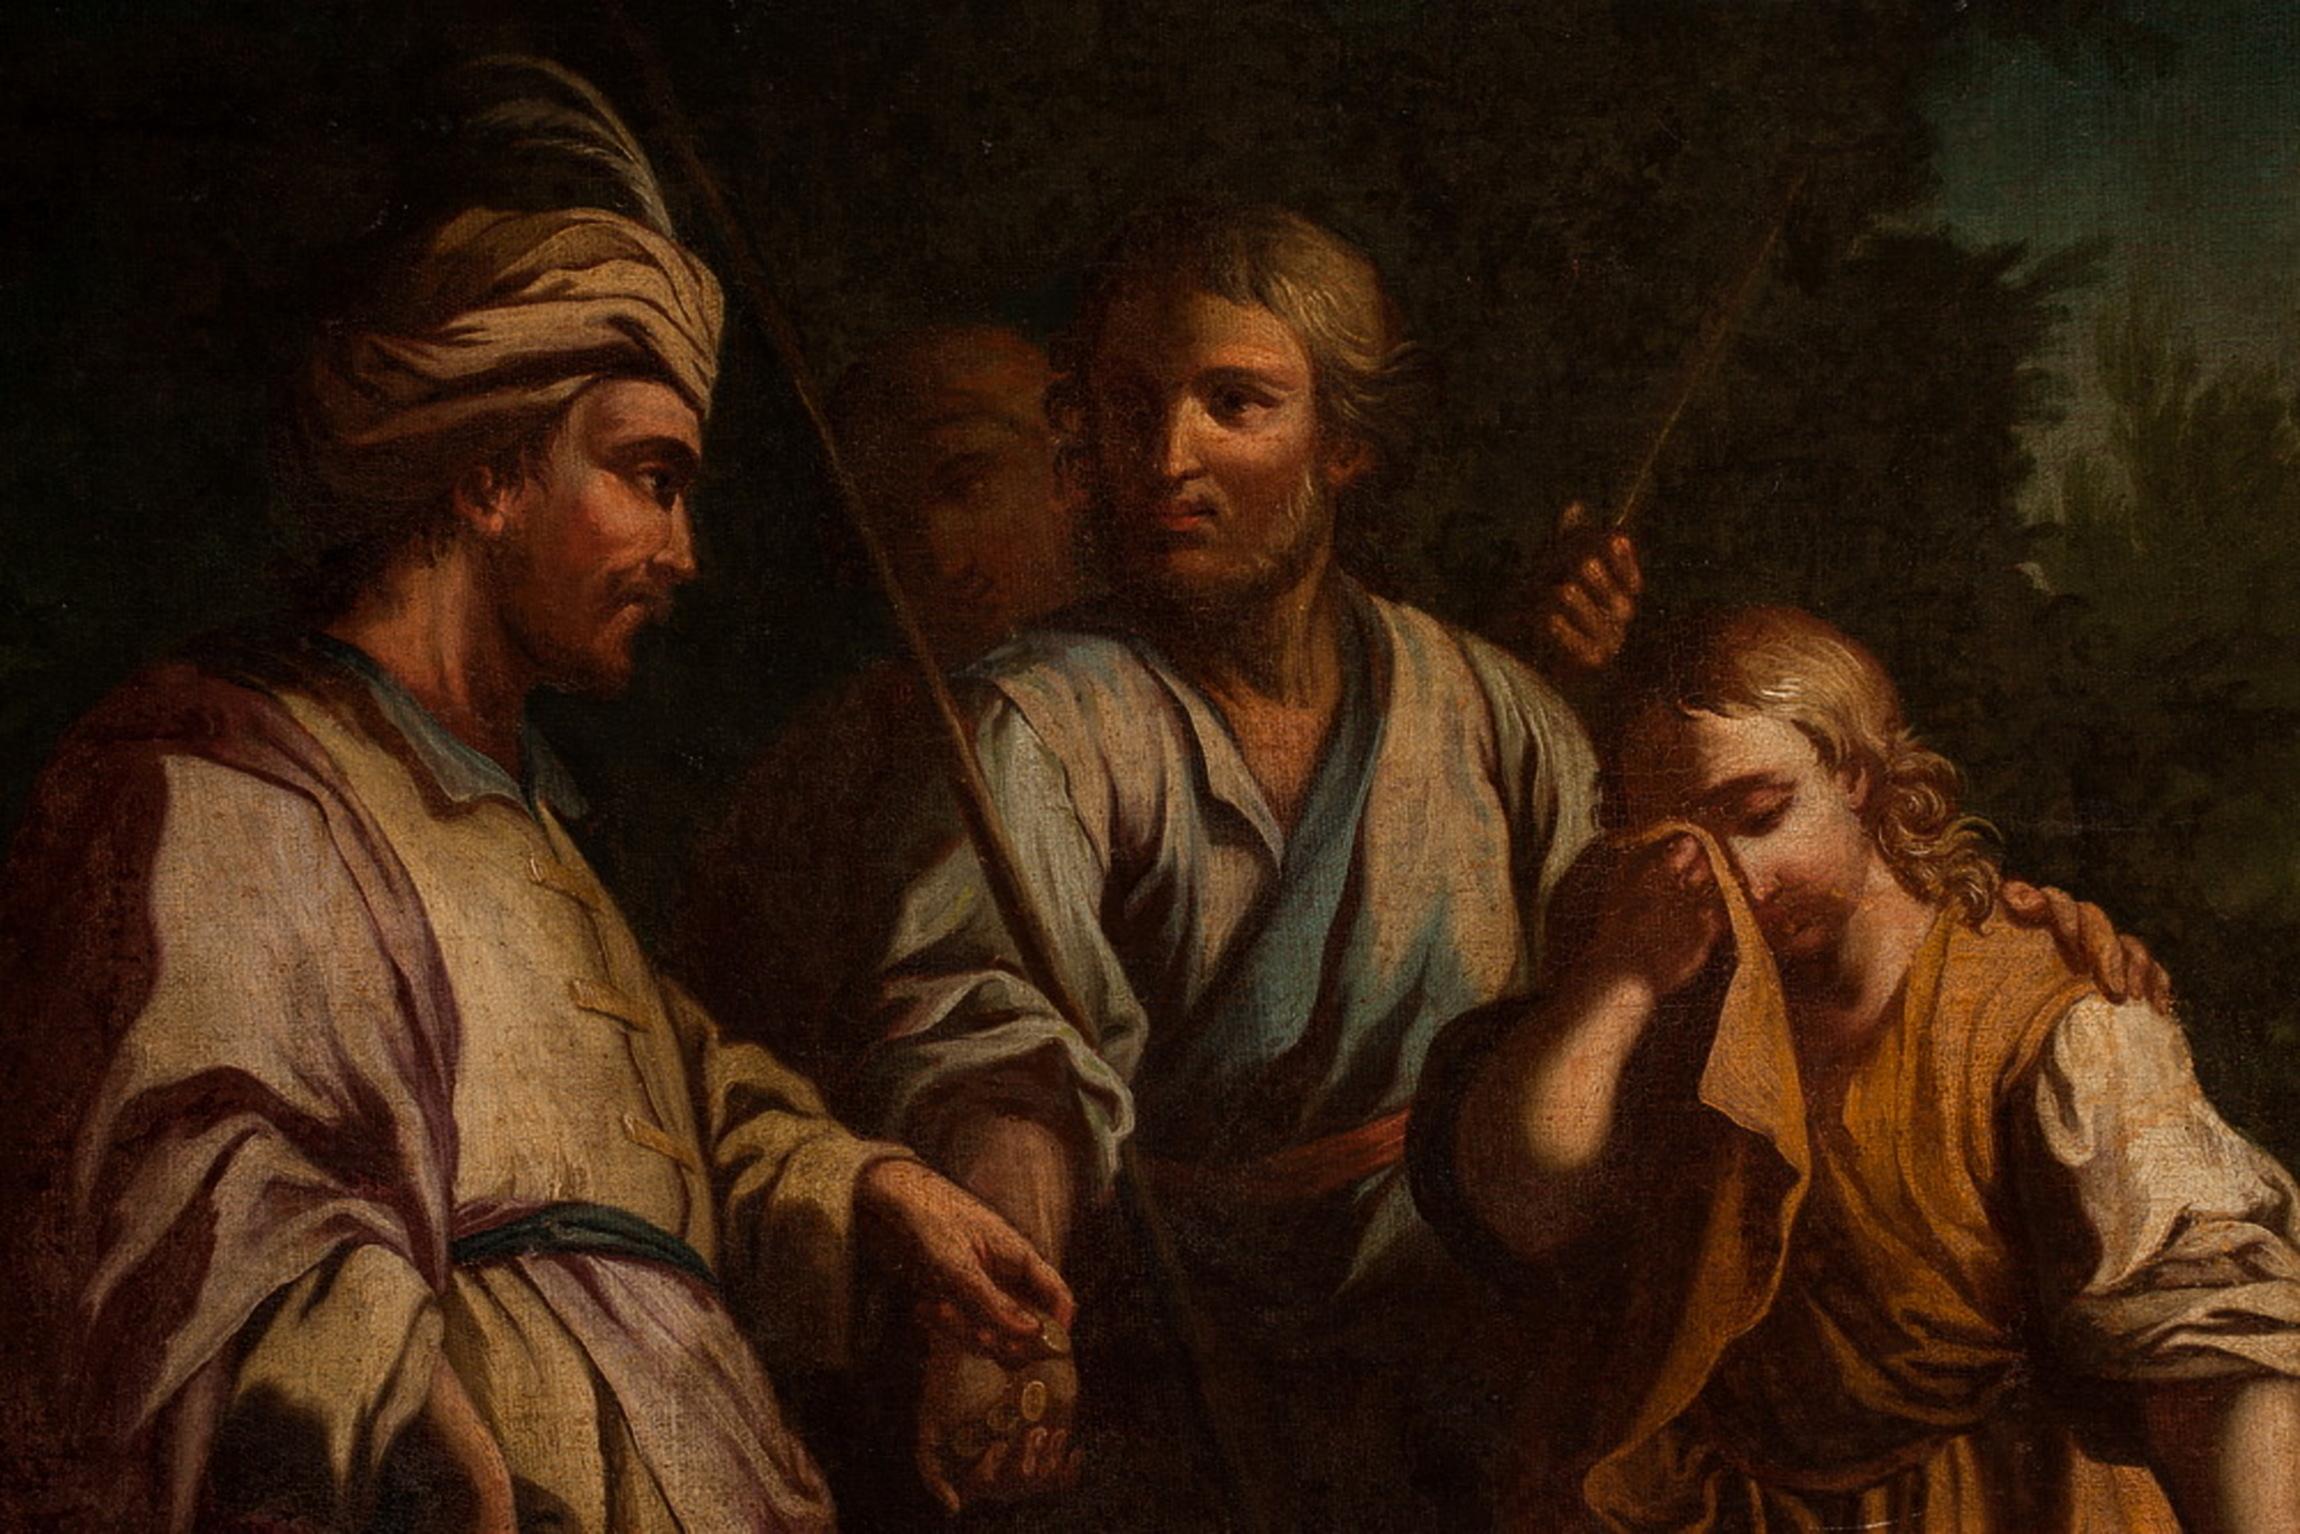 Painting representing scene of Joseph sold as a slave by his brothers. Oil on canvas.
Joseph meaning is an important figure in the Bible's Book of Genesis. Sold into slavery by his jealous brothers, he rose to become vizier, the second most